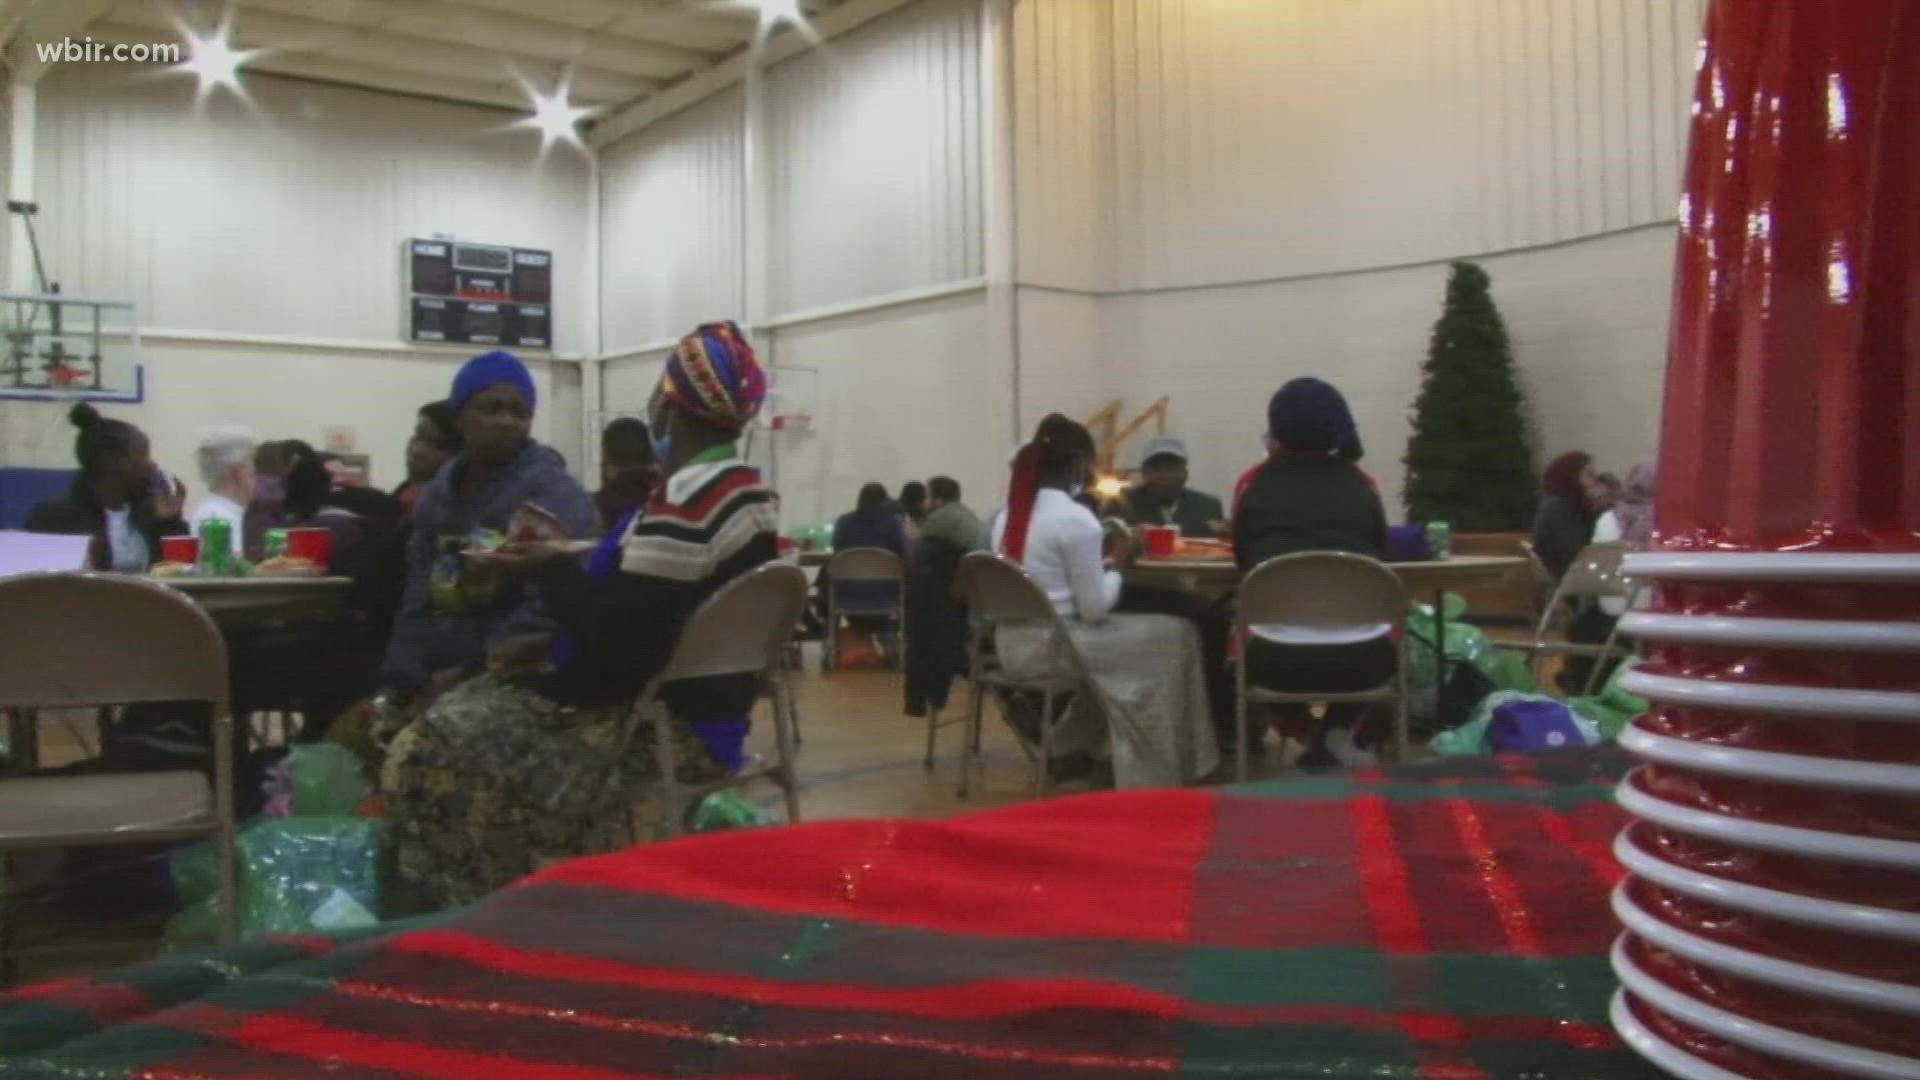 Refugees and immigrants came together to celebrate the holidays at the Center for English.